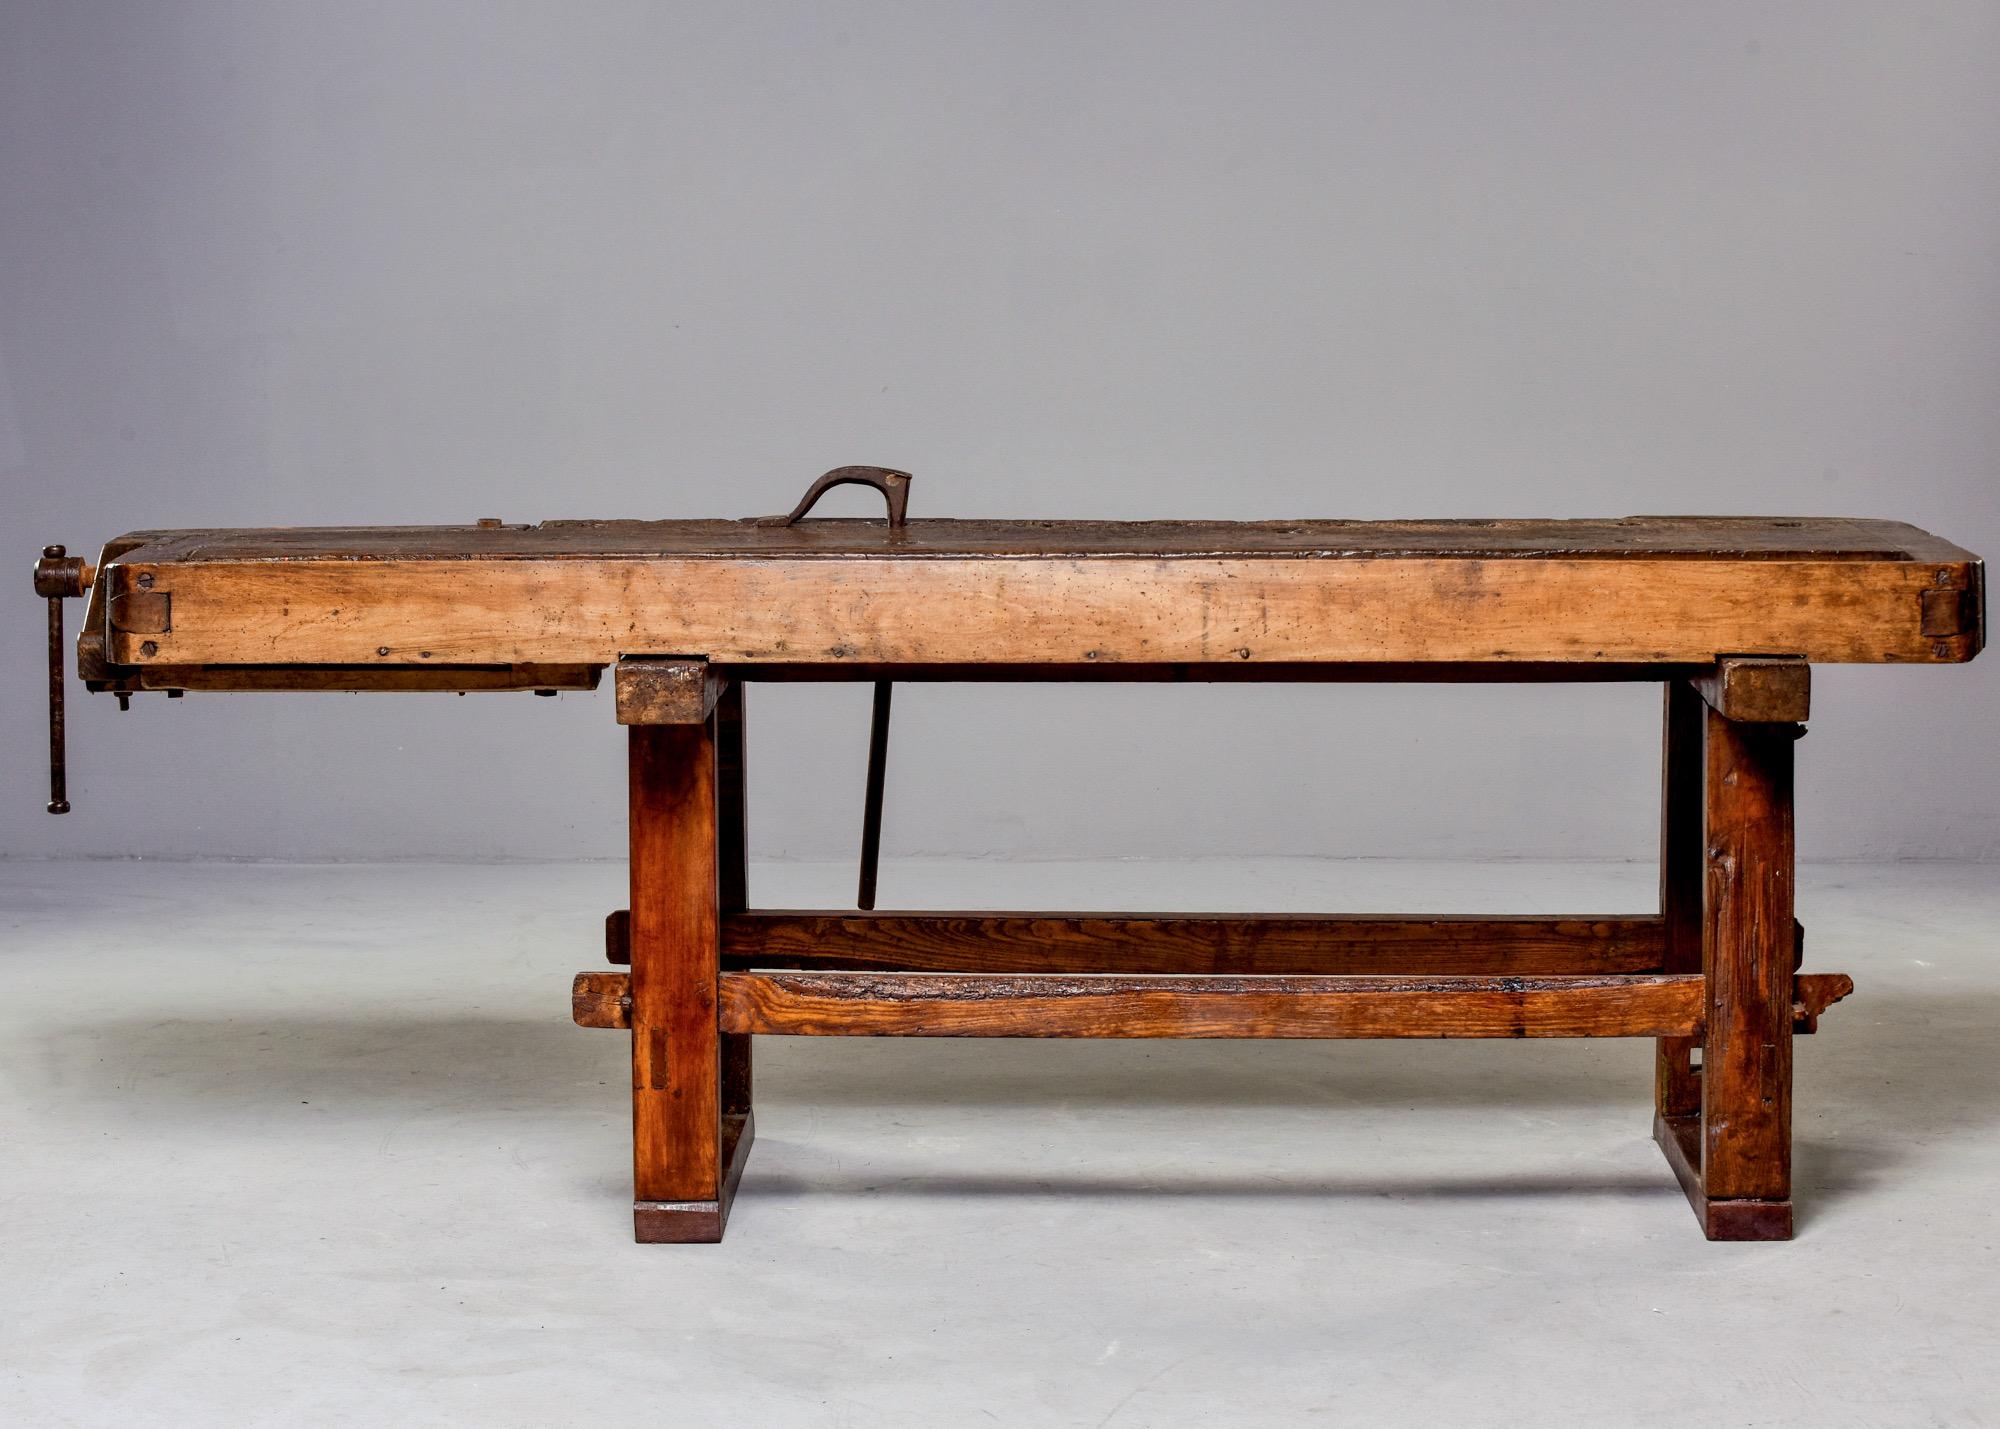 French work bench in dense oak with attached hand forged iron tools including a vise at one end, circa 1880s. Authentic wear and patina to top. Versatile height and size make this piece usable as a unique console, bar or server. Unknown maker.